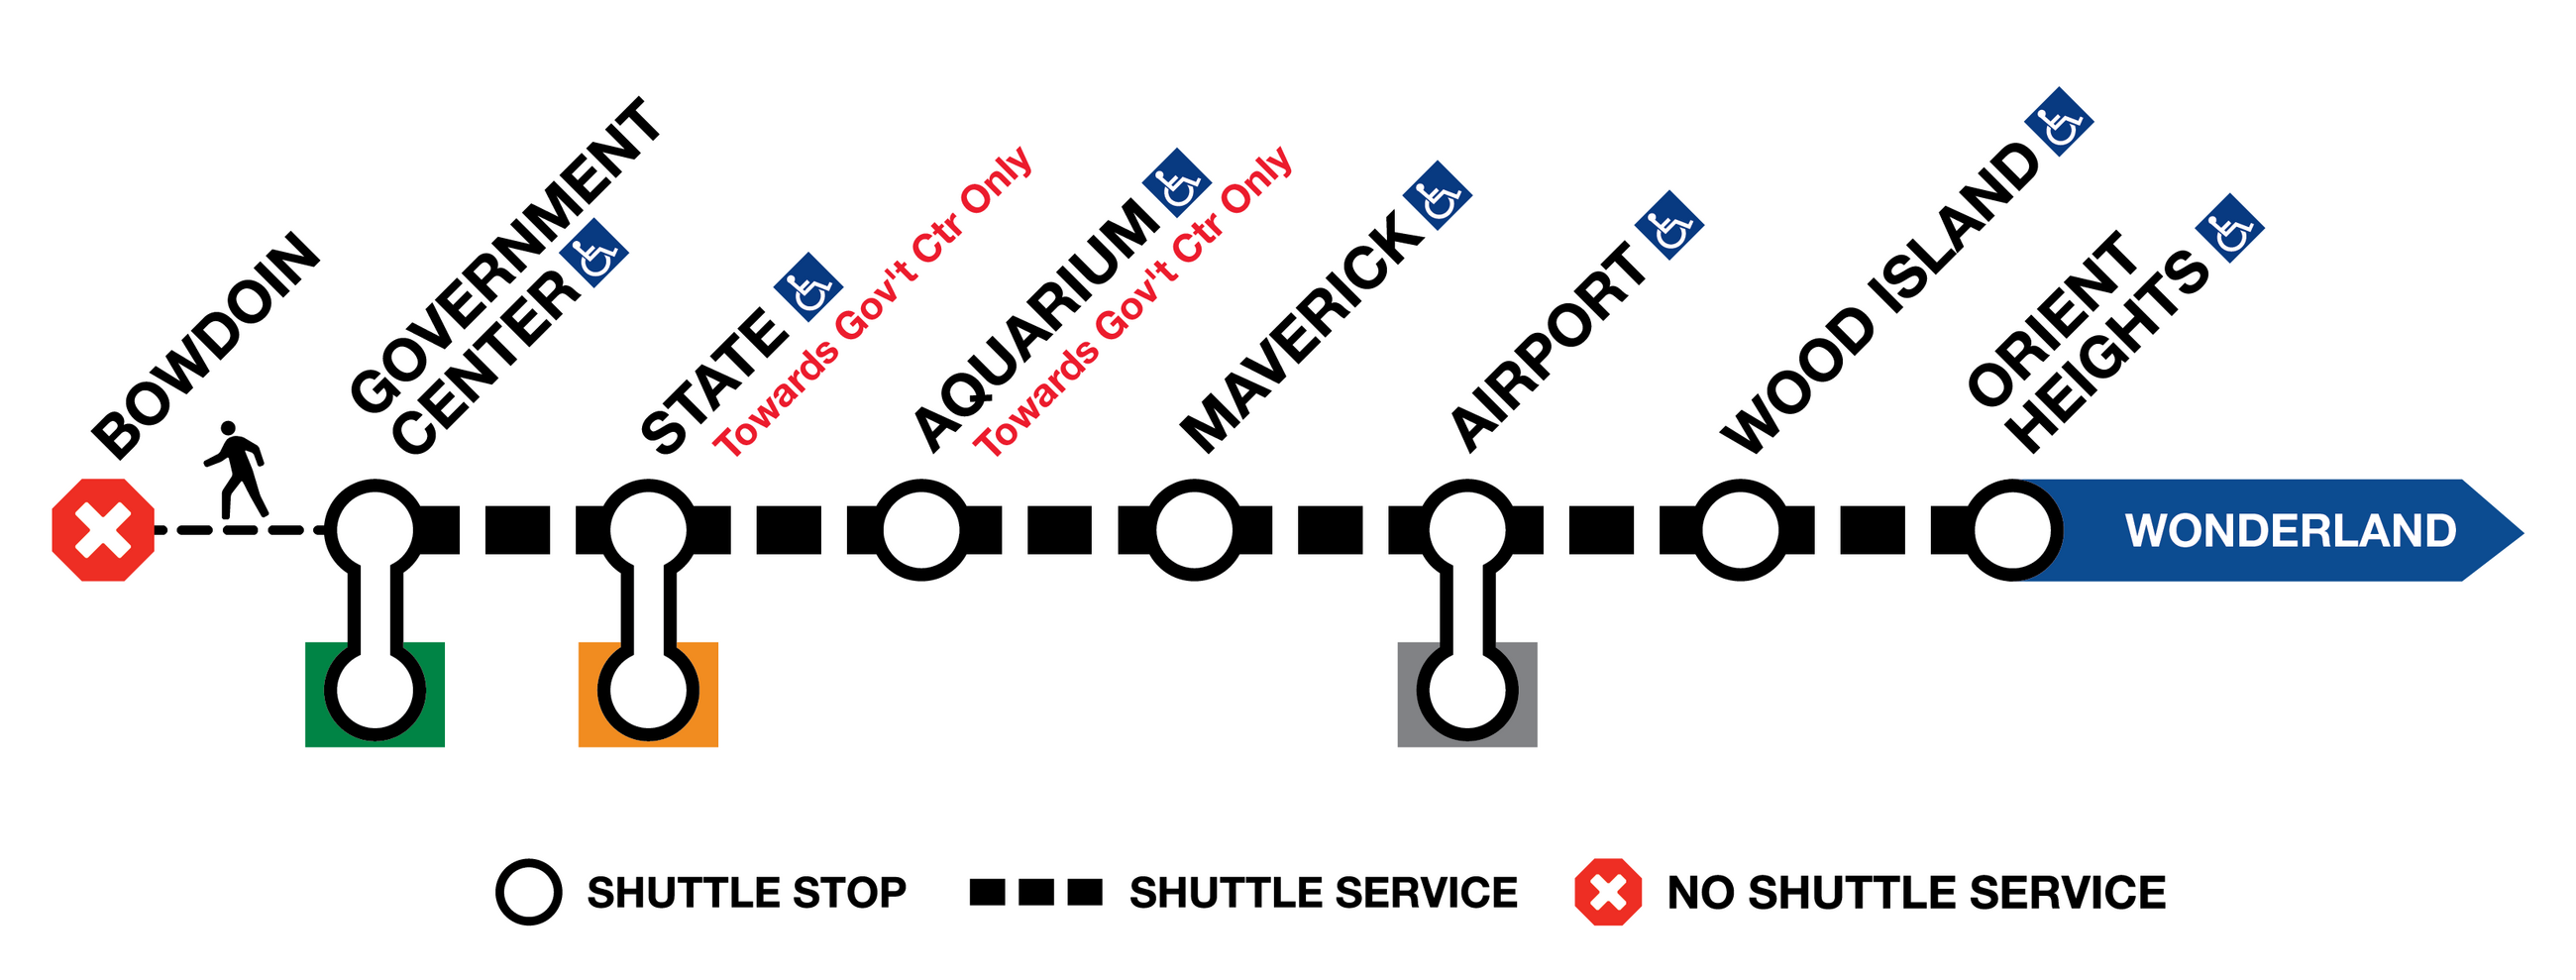 Shuttle service graphic for the Blue Line night closure